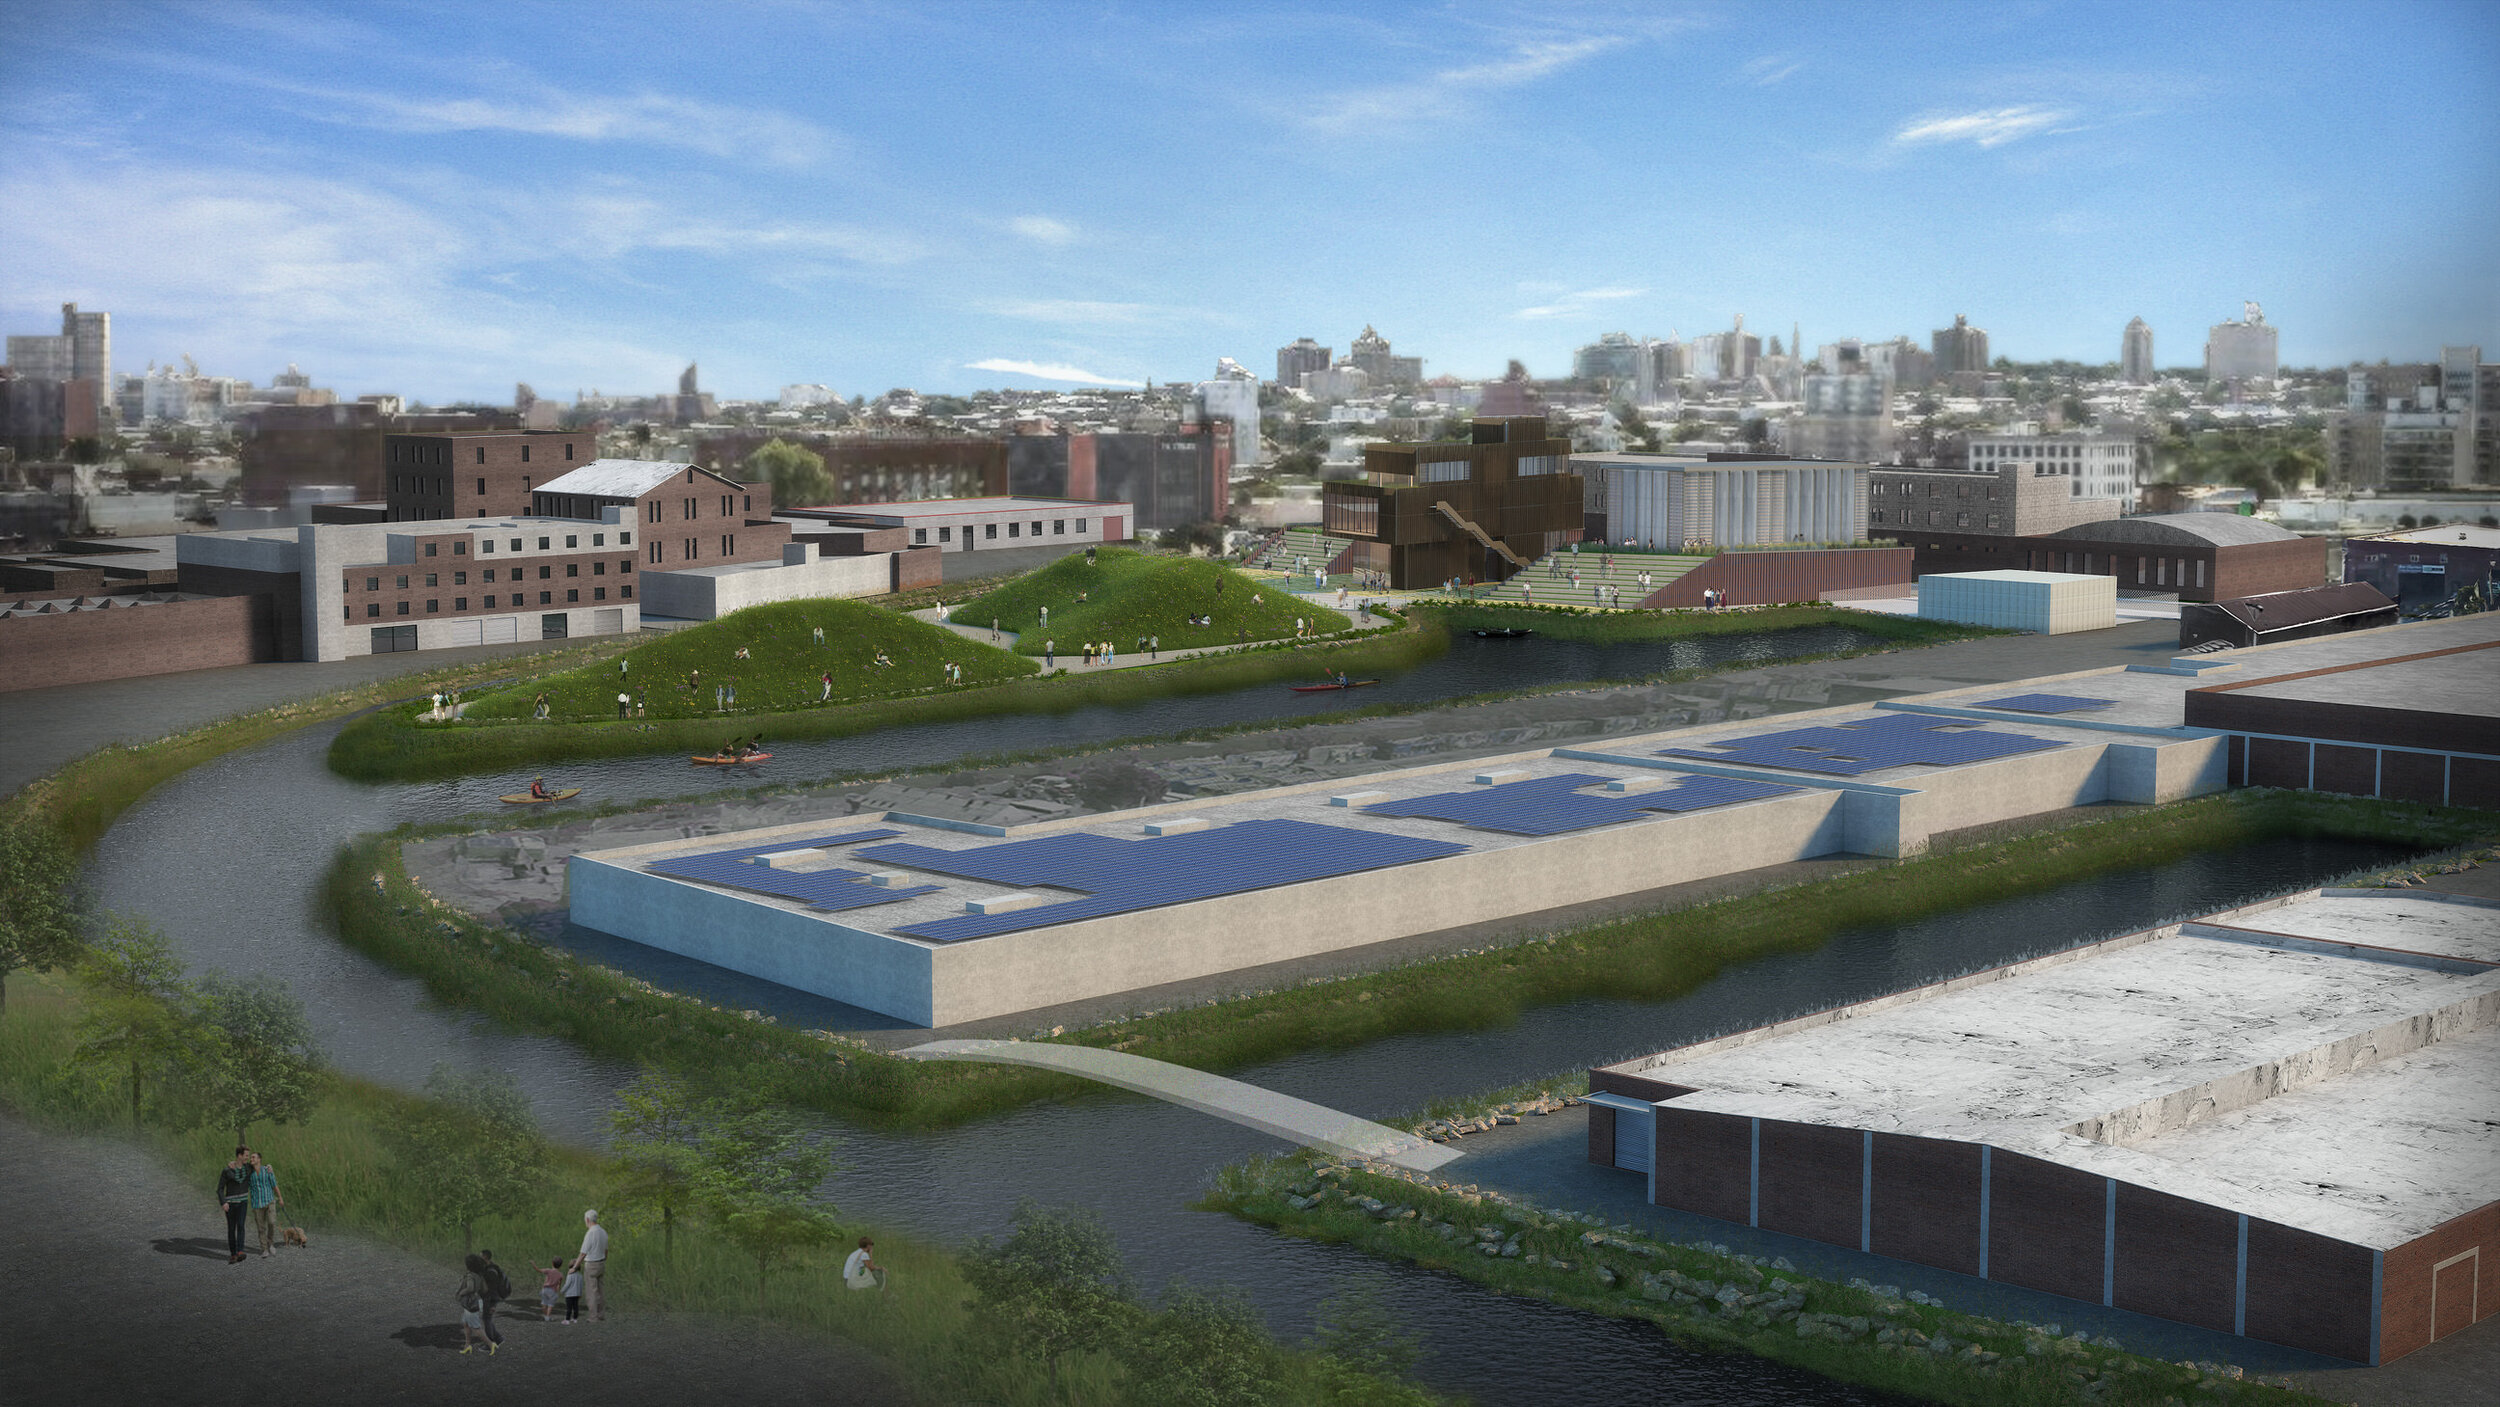 View of Gowanus Salt Lot Public Park and Environs from F/G Subway